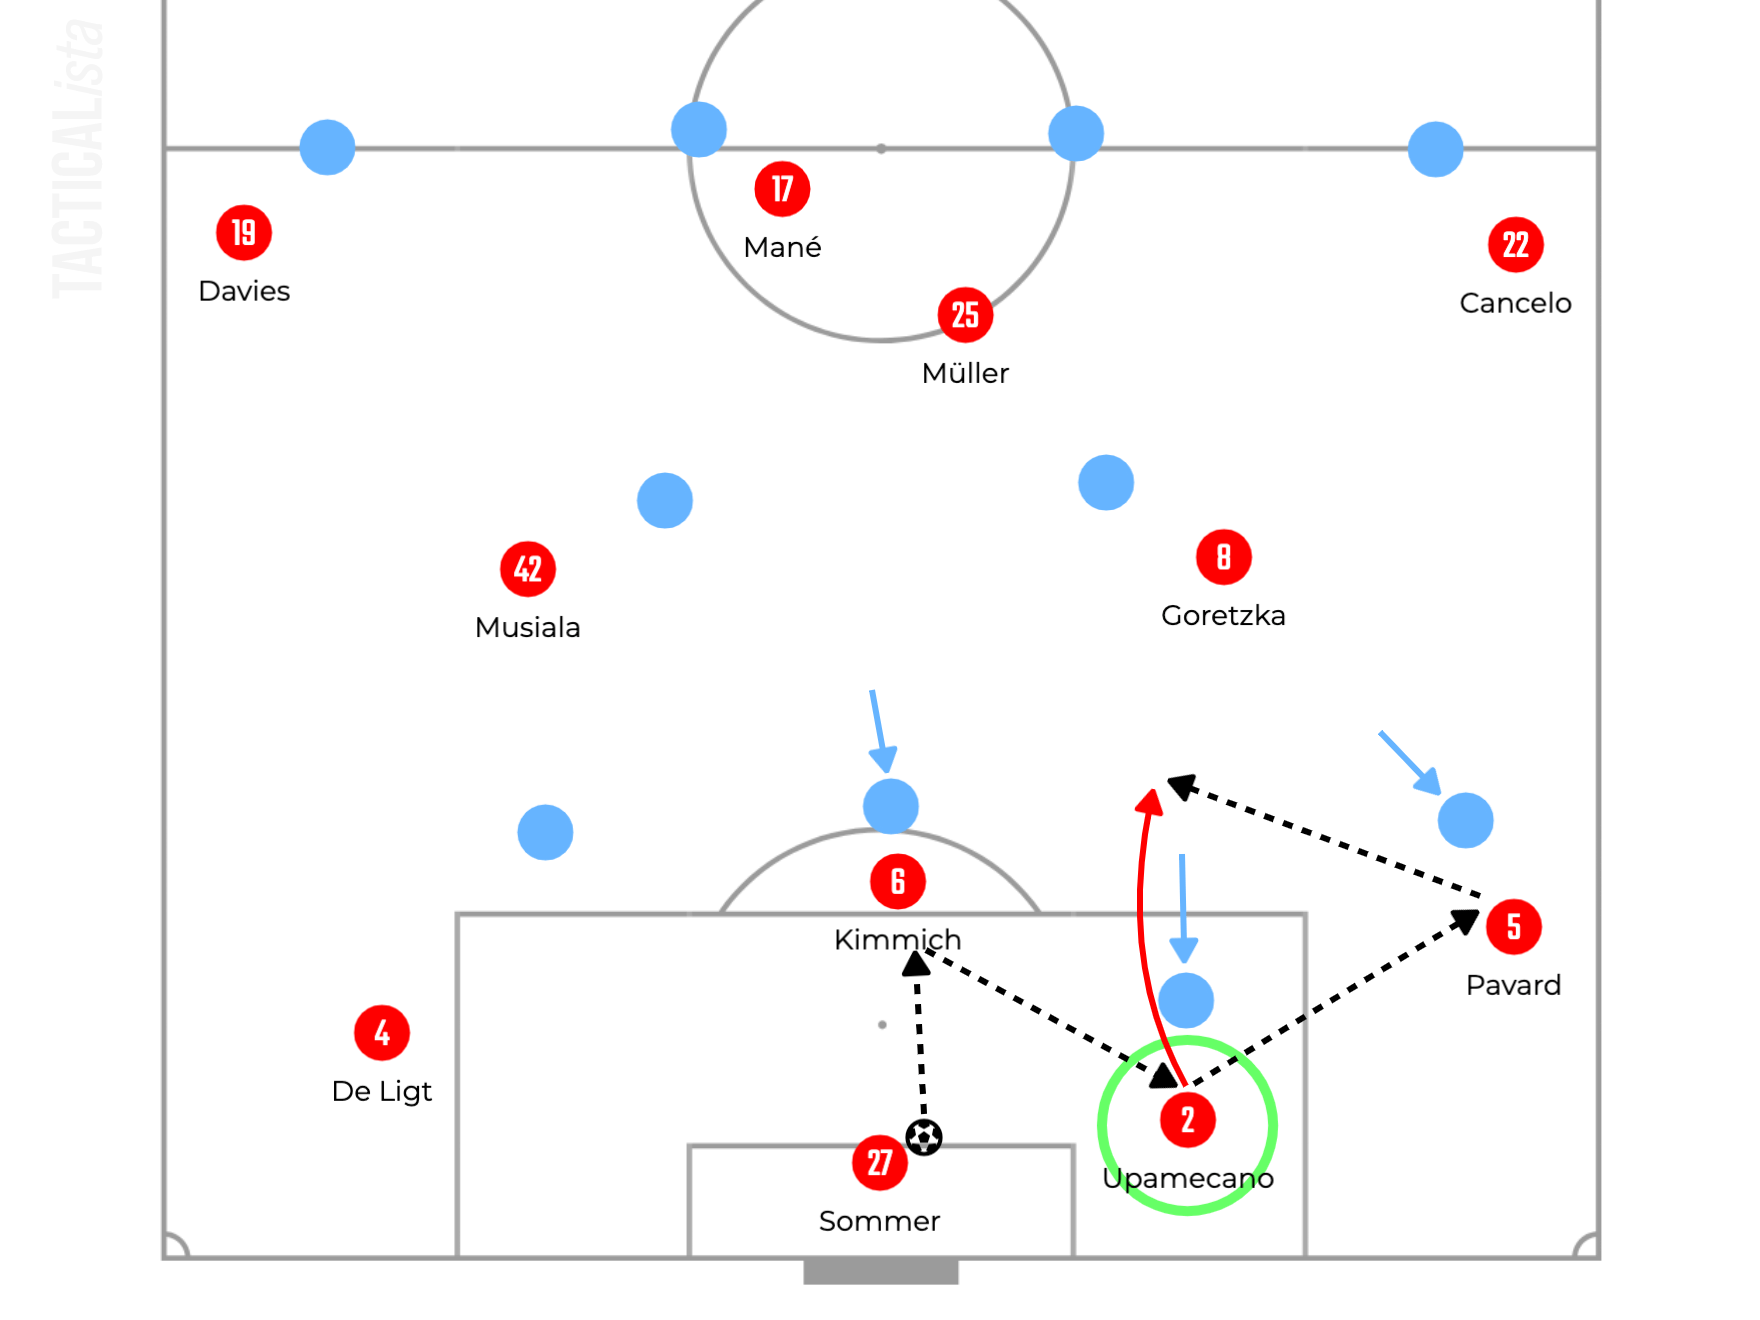 Julian Nagelsmann The Master of the Press! - FM 21 Tactical Analysis